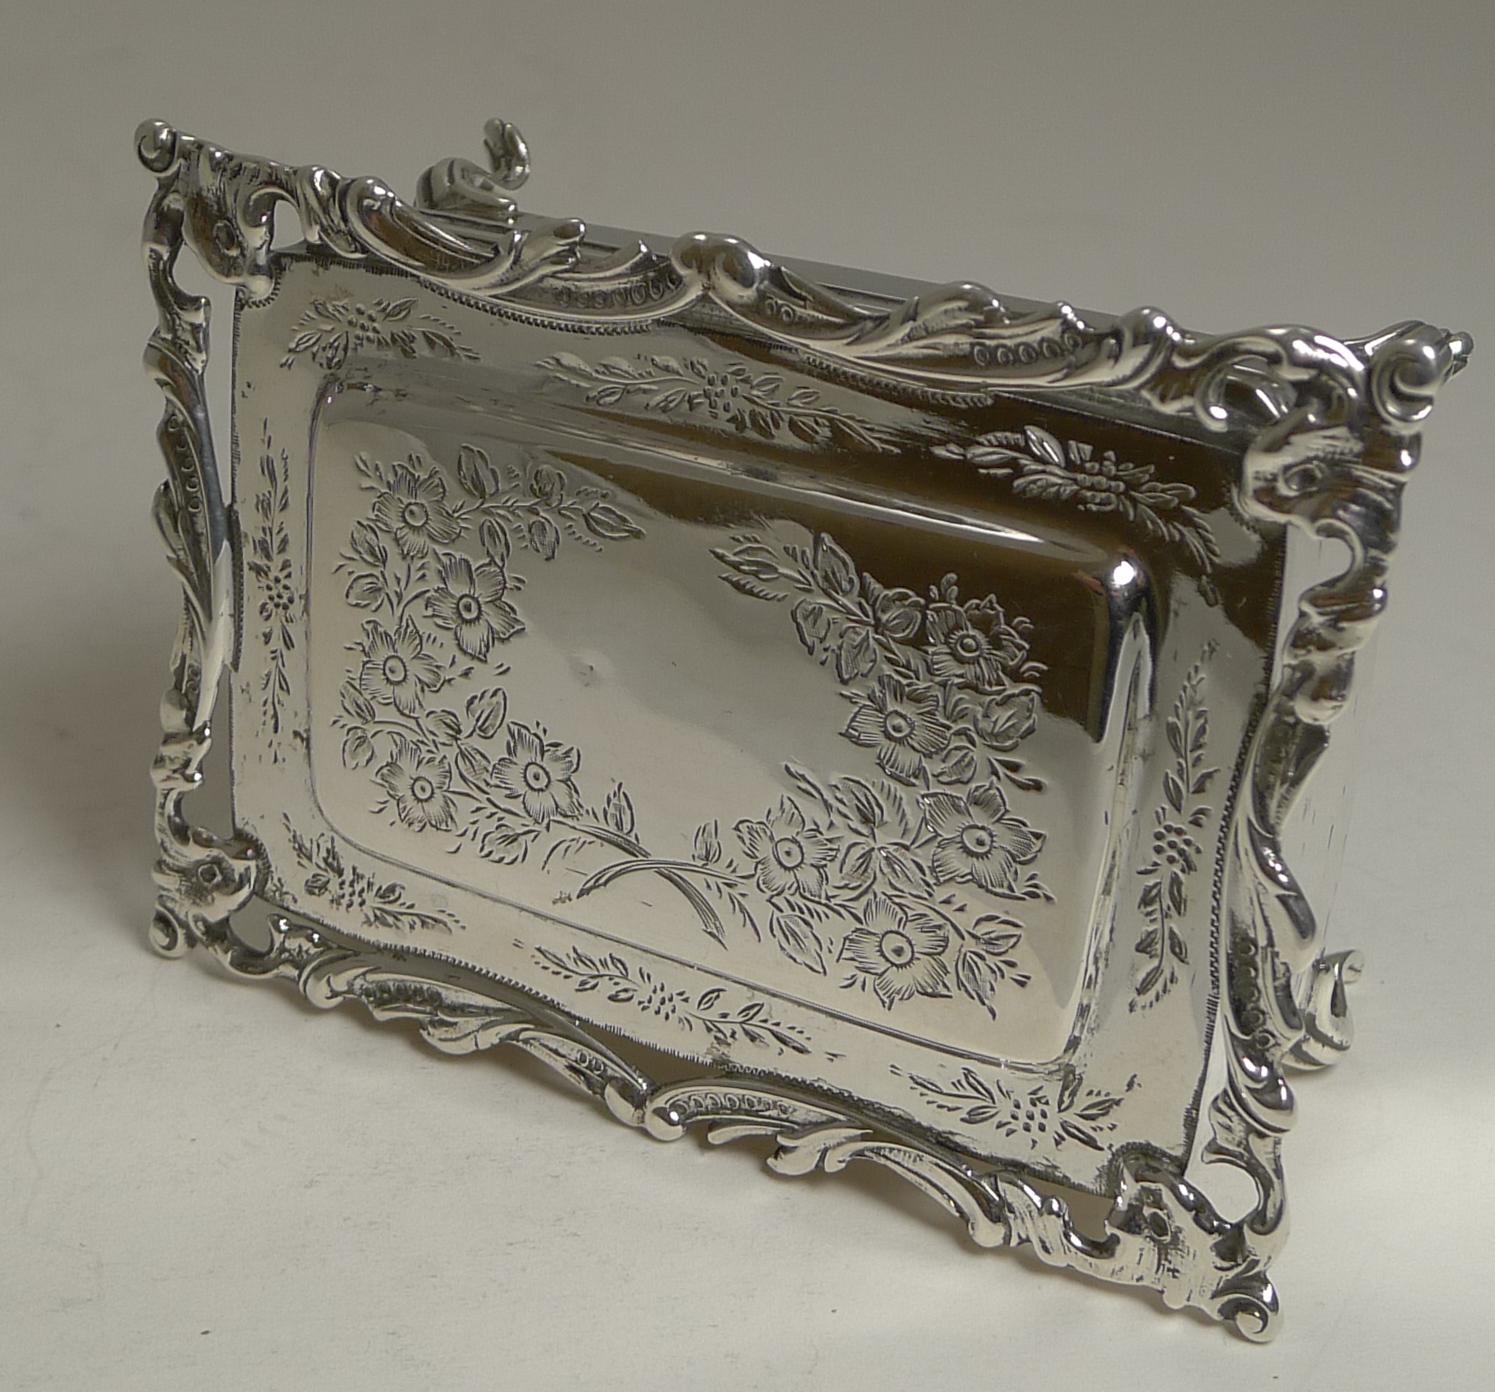 Early 20th Century Antique English Sterling Silver Jewelry / Ring Box, 1906